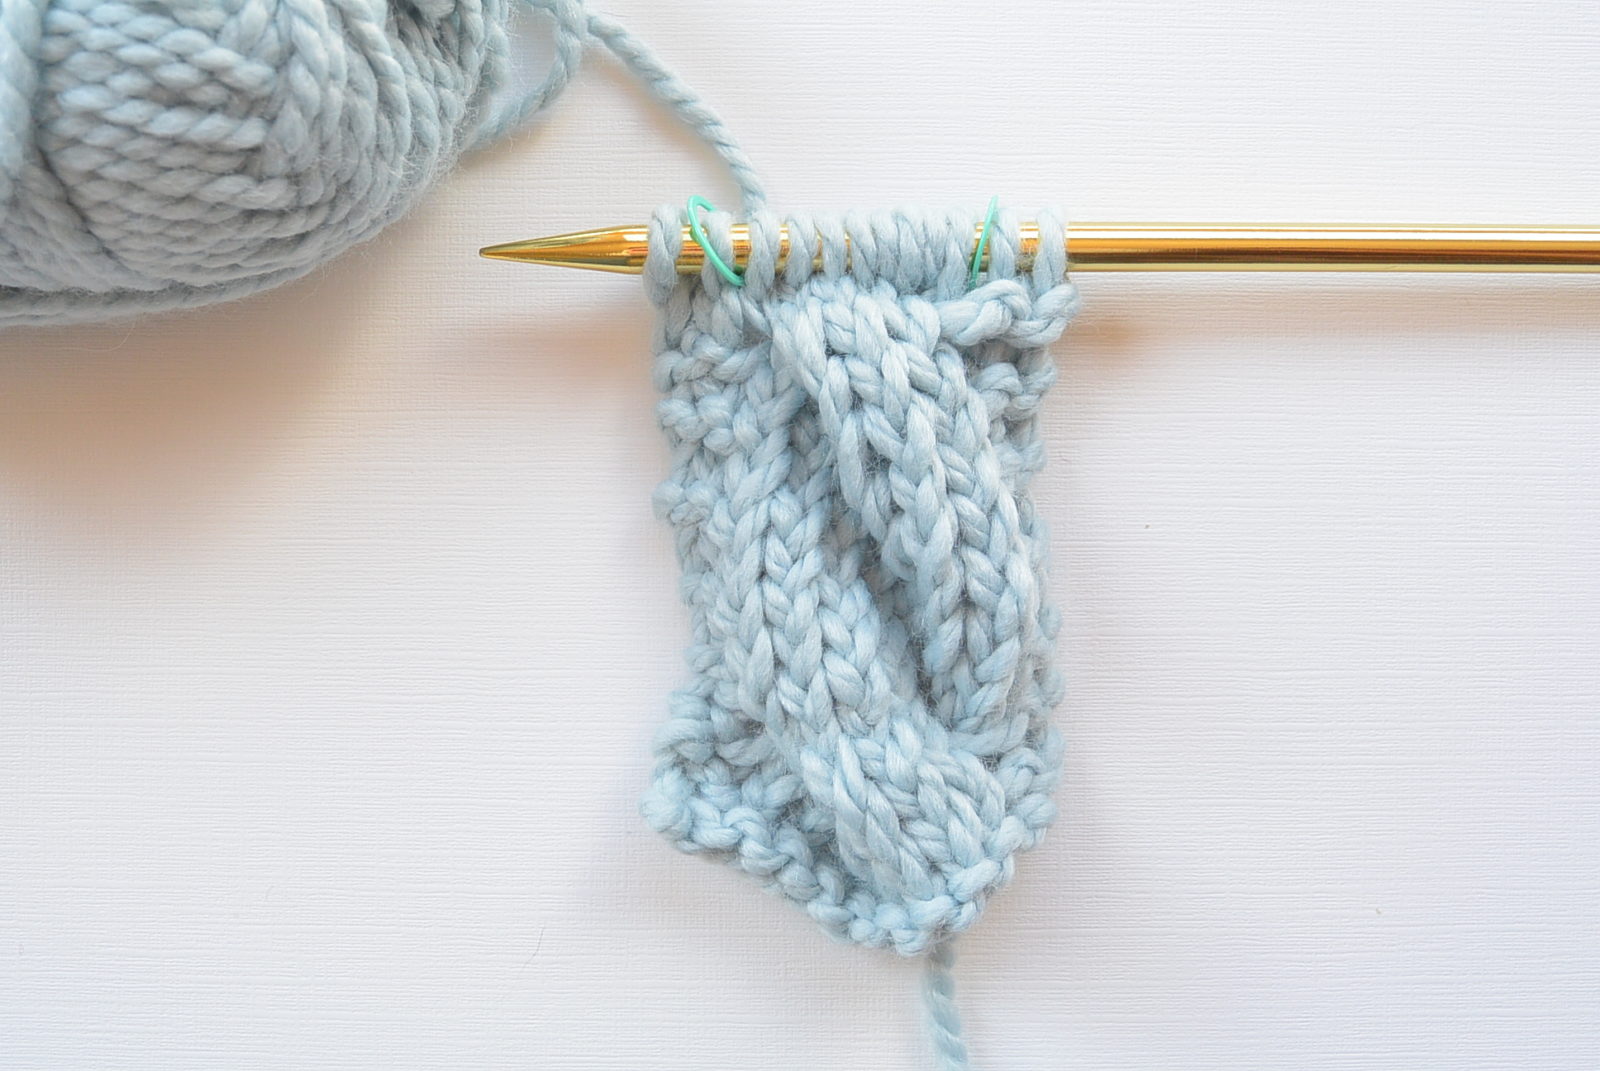 How To Knit A Simple Cable Mama In A Stitch